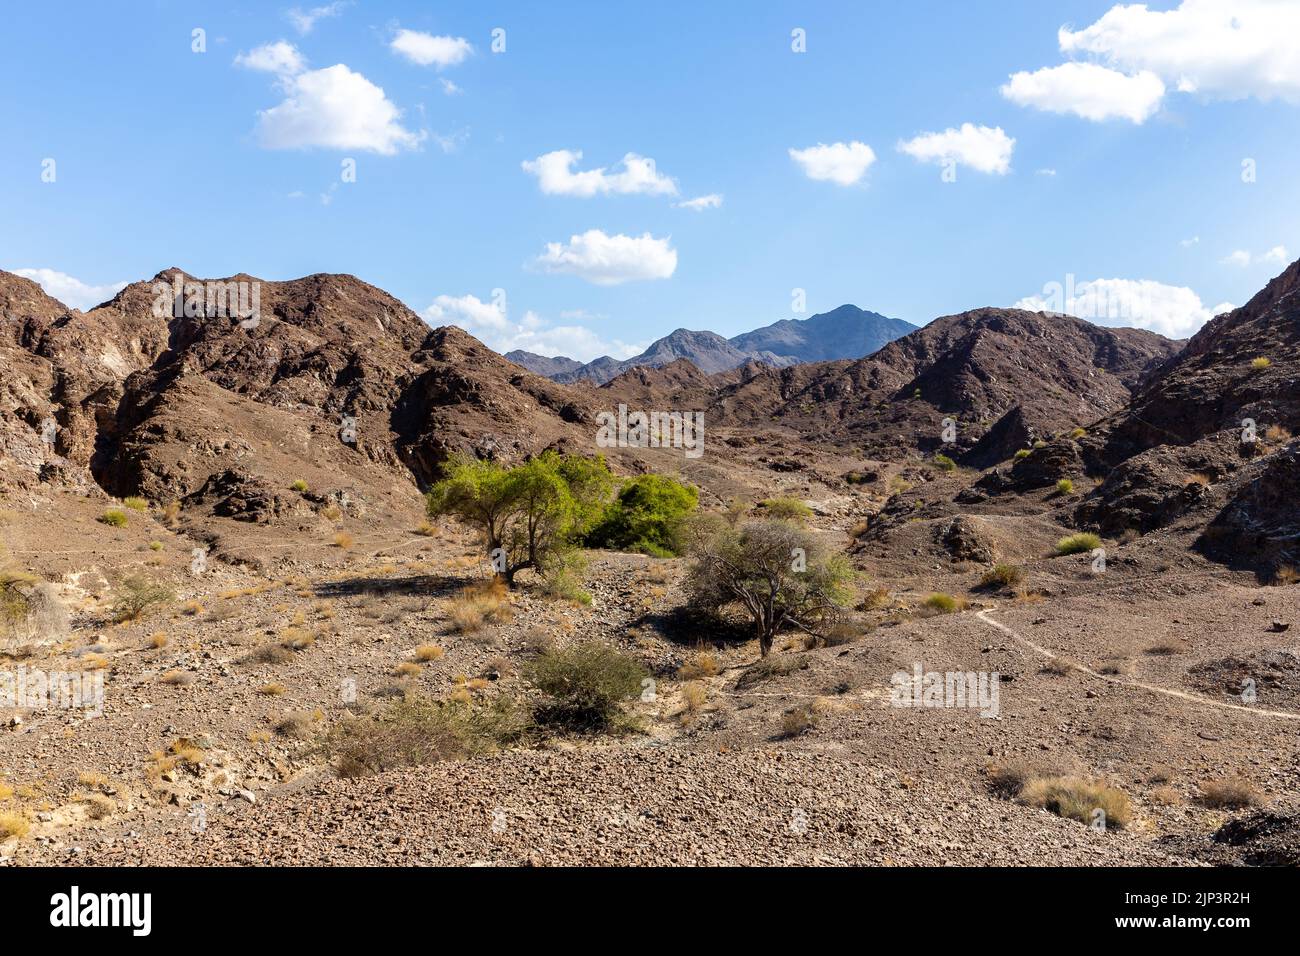 Wadi Shawka riverbed in Hajar Mountains, with oasis, ghaf trees, acacia trees and plants, rocky limestone mountains in the background, UAE. Stock Photo